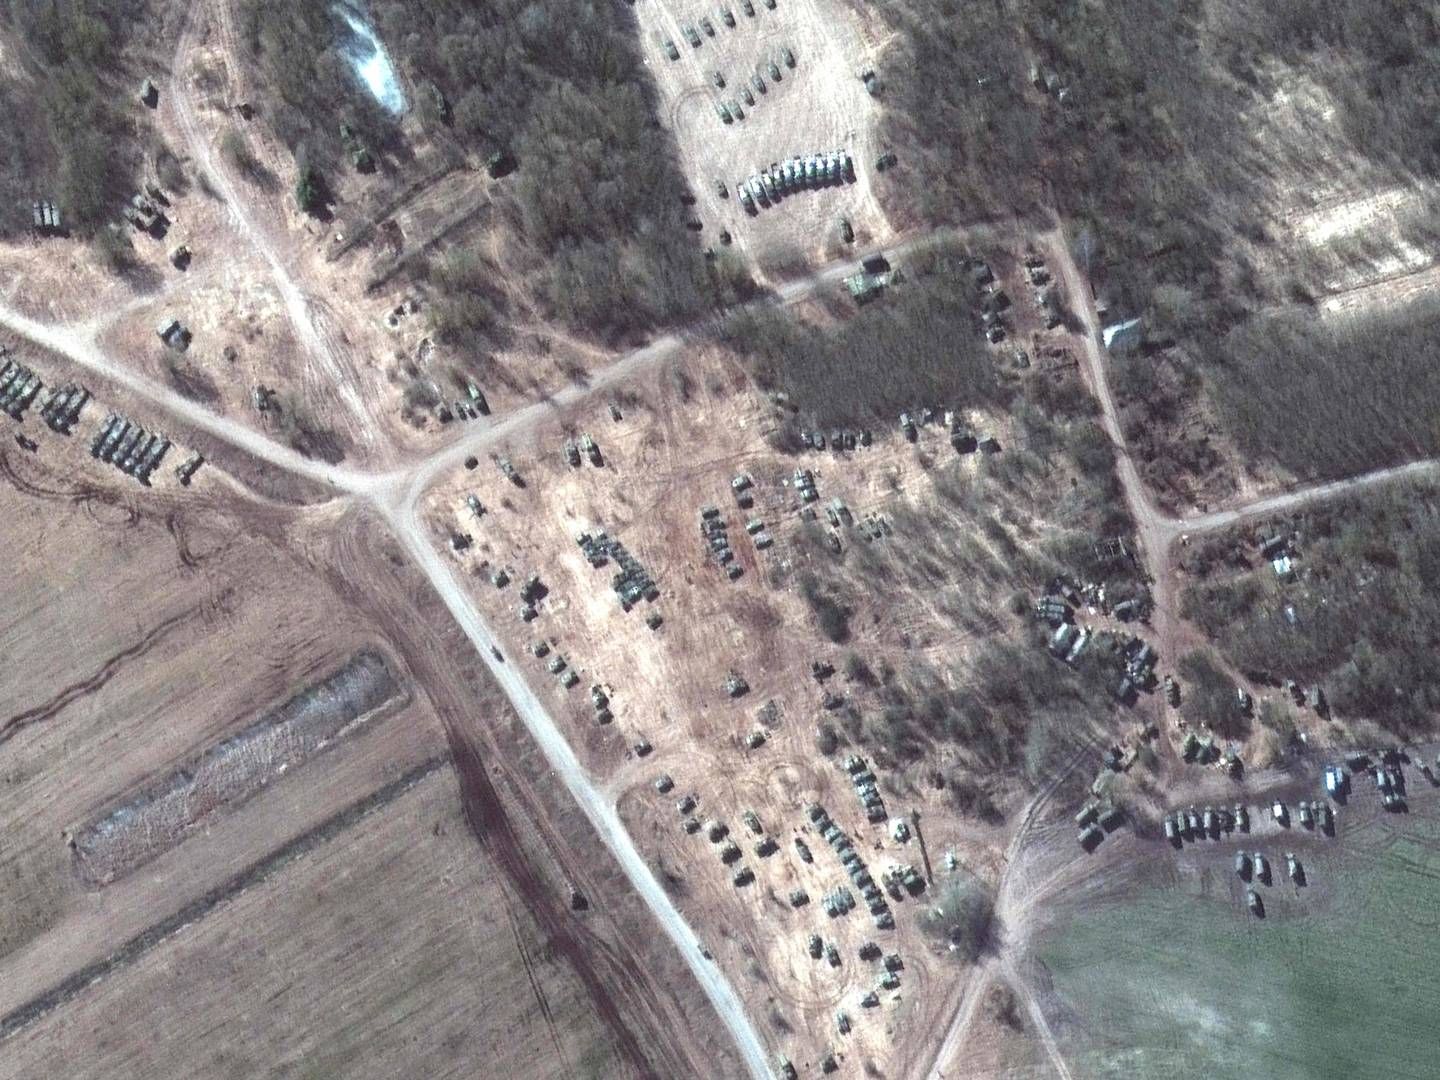 This handout satellite image released by Maxar Technologies shows troop tents and equipment from Russian ground forces in Dublin, a village in the Gomel region of Belarus, on March 18, 2022. | Photo: AFP/Ritzau Scanpix